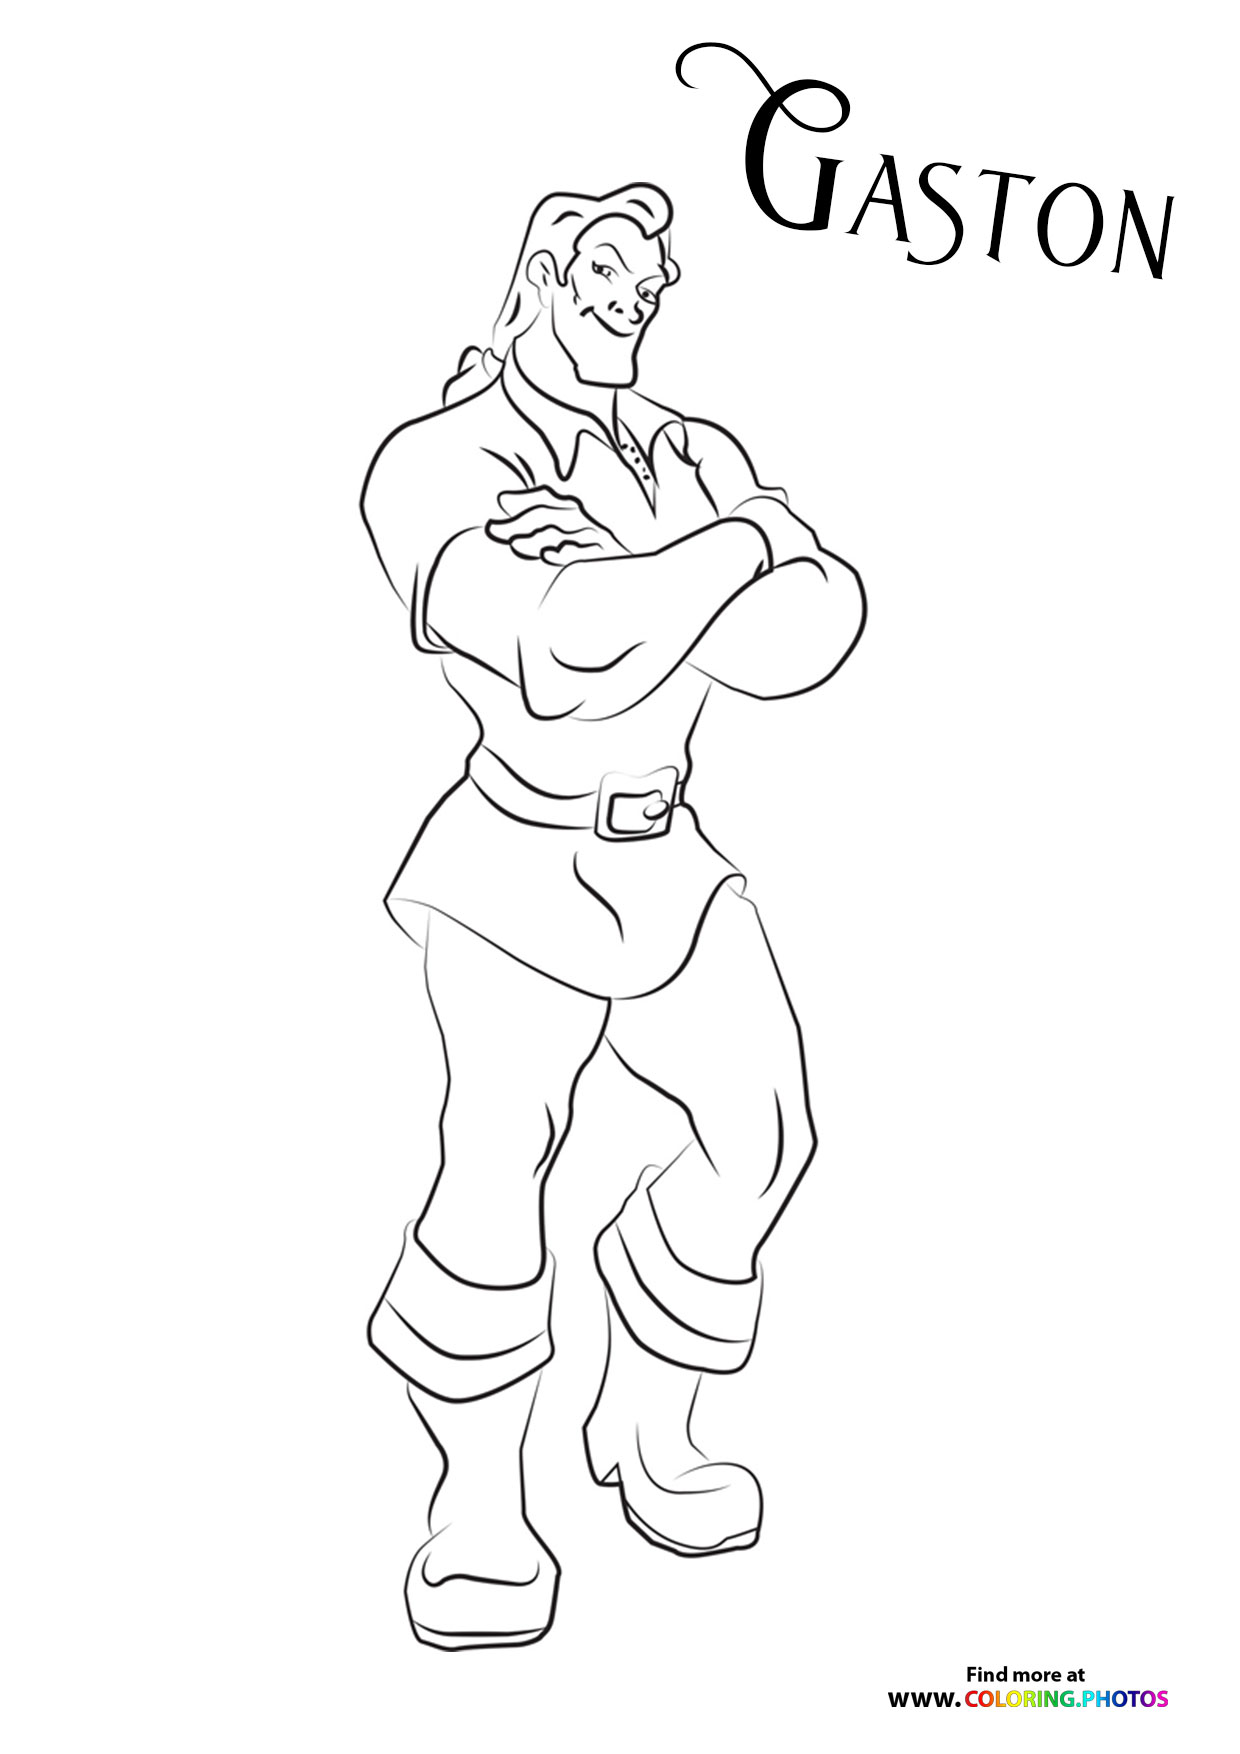 Gaston from Beauty and the Beast - Coloring Pages for kids